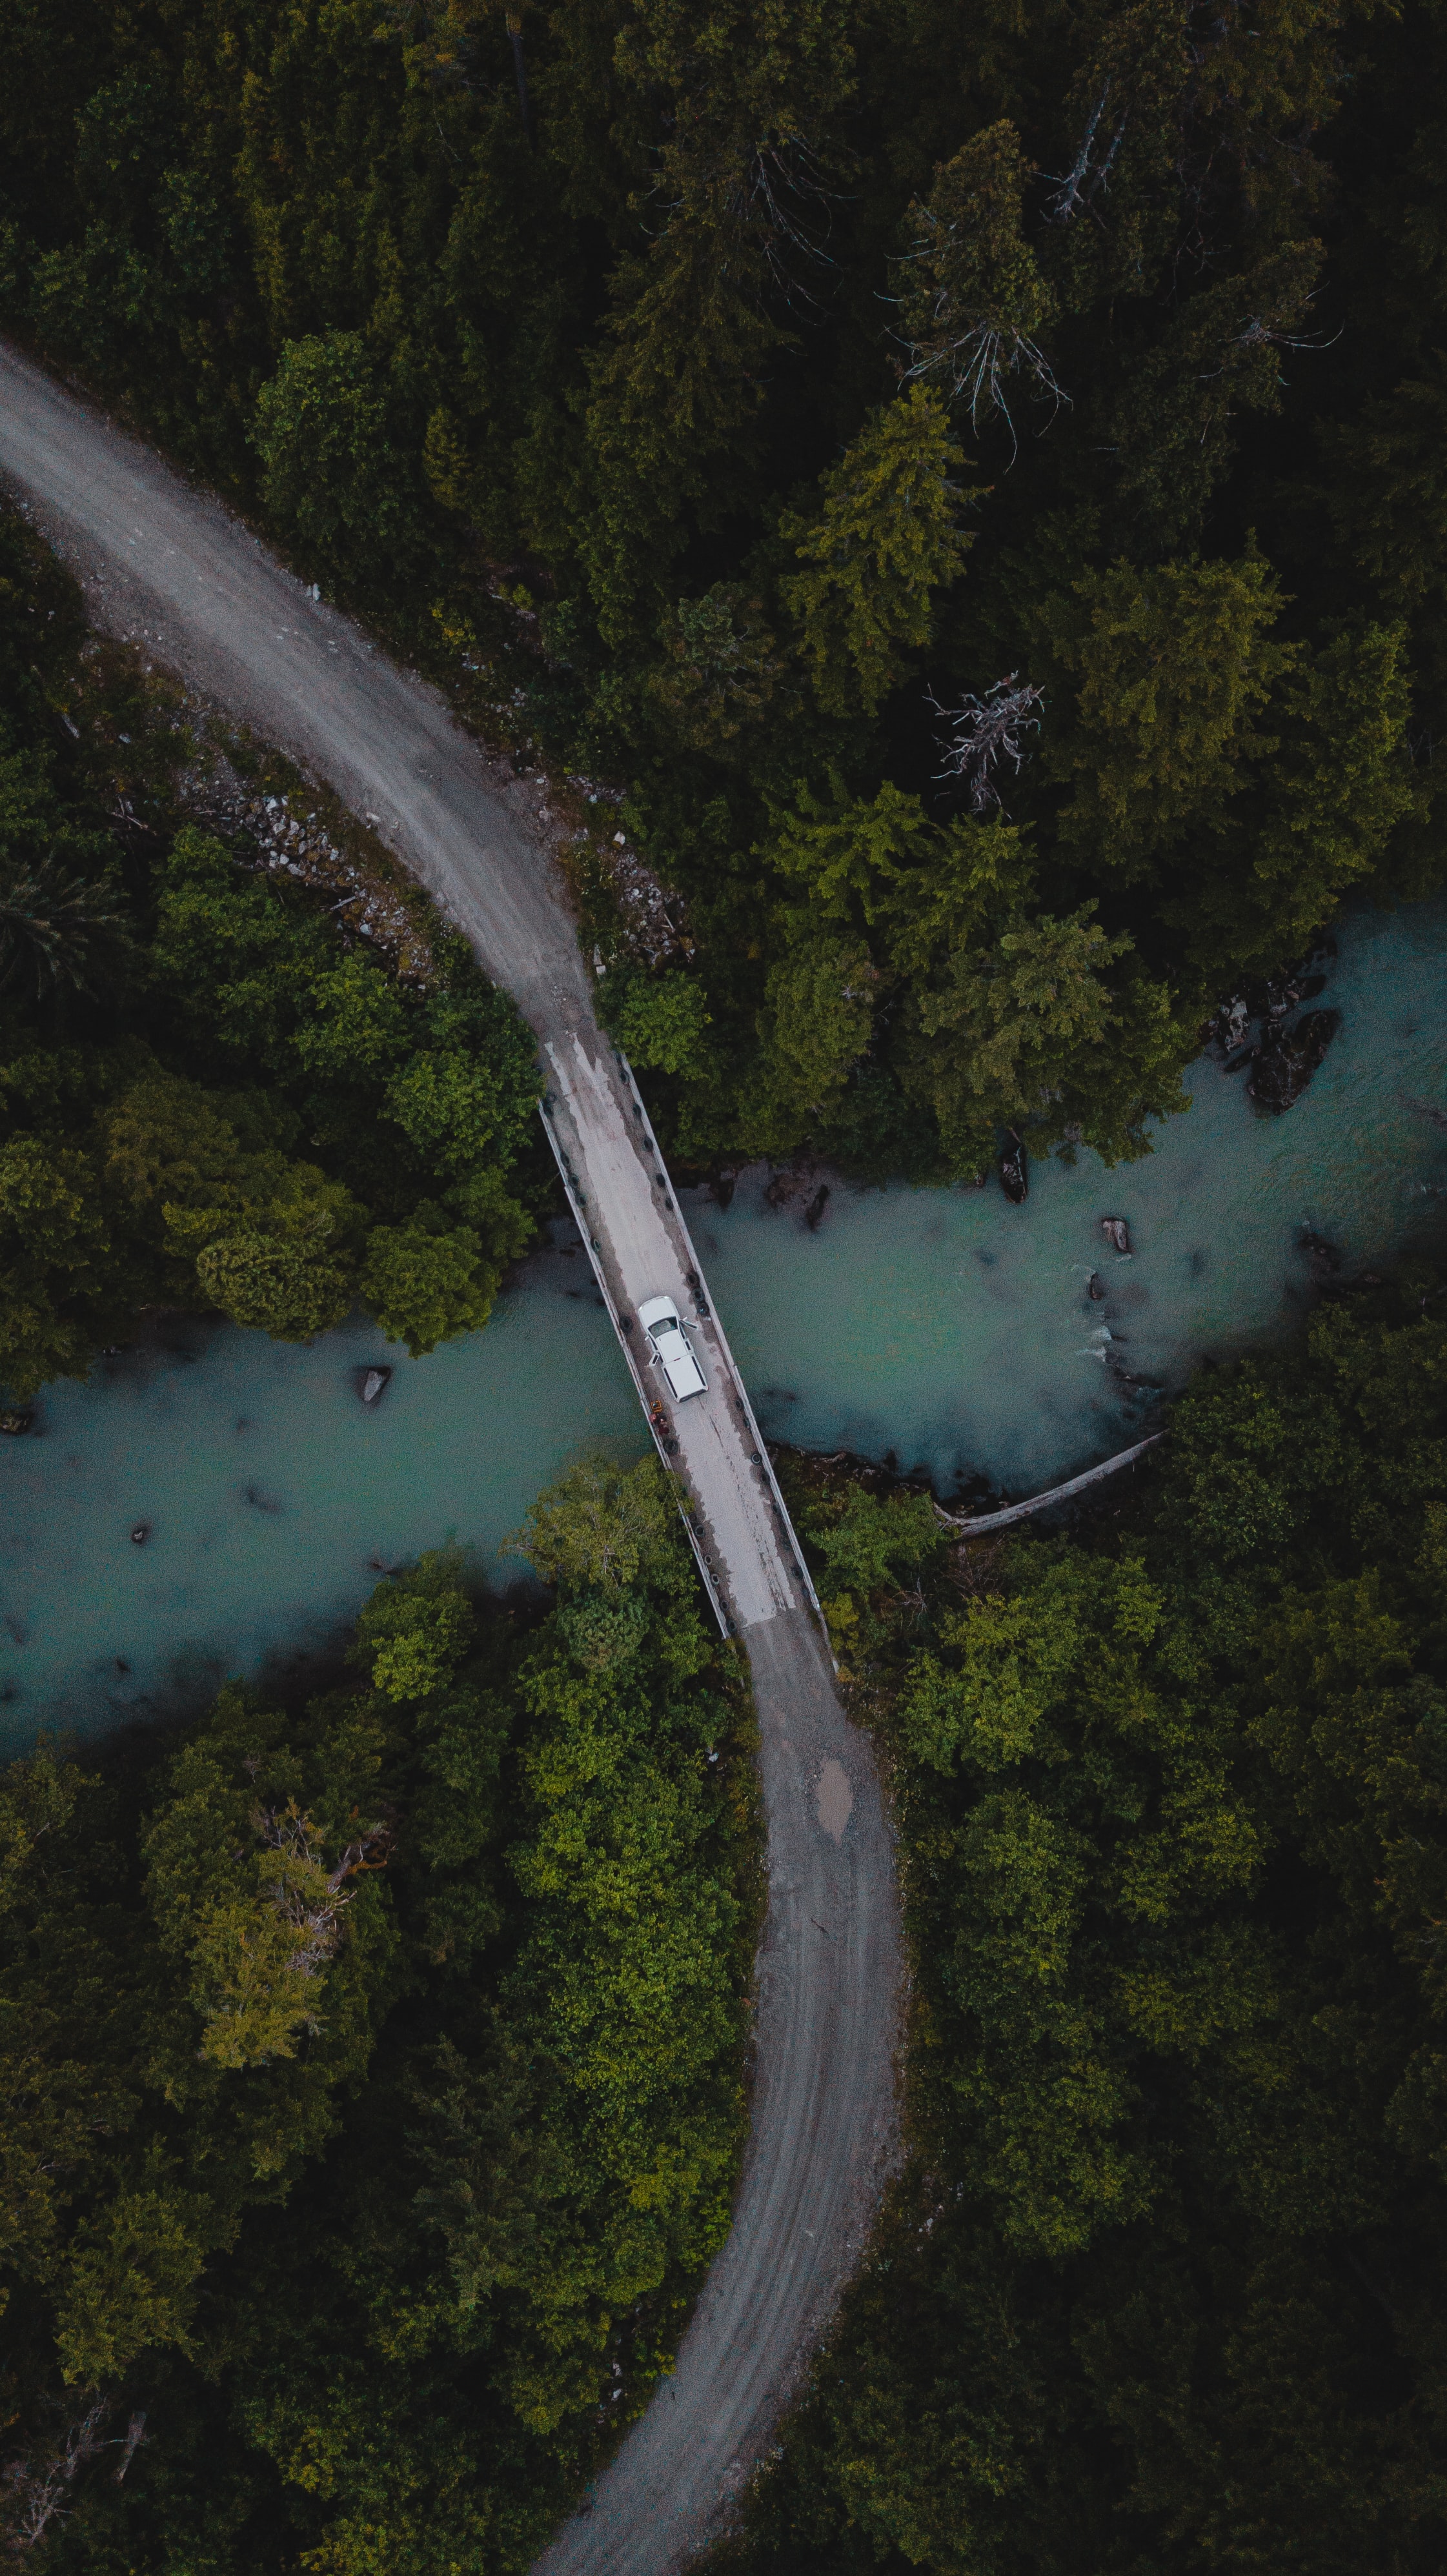 Windows Backgrounds rivers, nature, trees, view from above, forest, car, machine, bridge